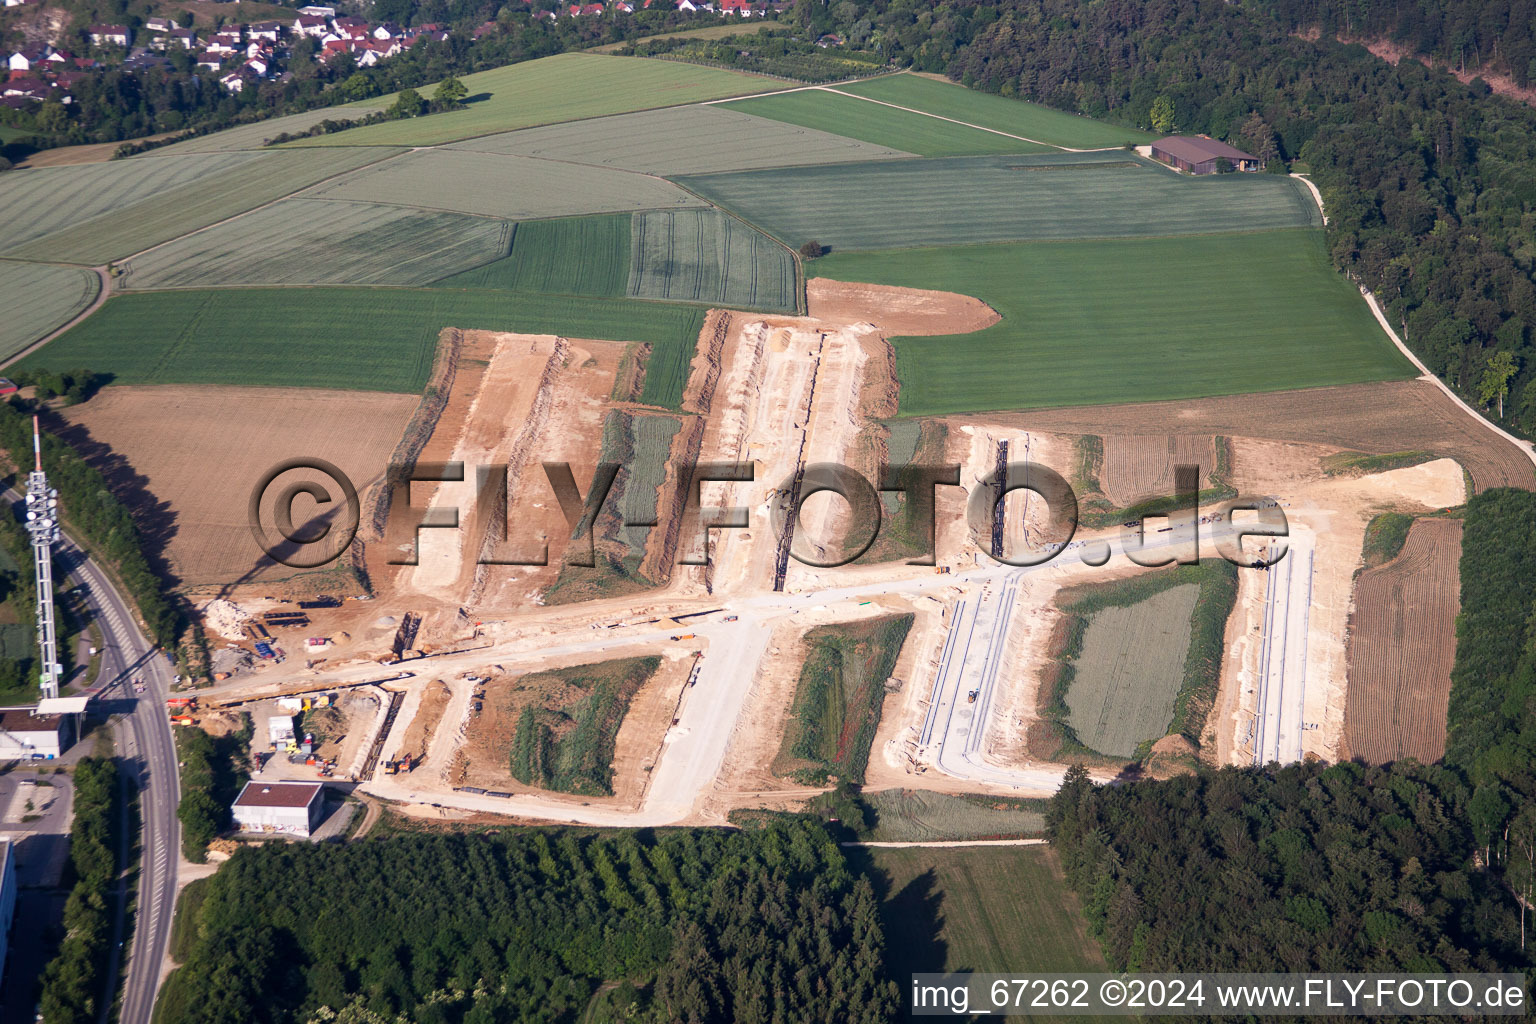 Construction site with development works and embankments works for new settlement on Marie-Goeppert-Mayer Strasse in Ulm in the state Baden-Wurttemberg, Germany